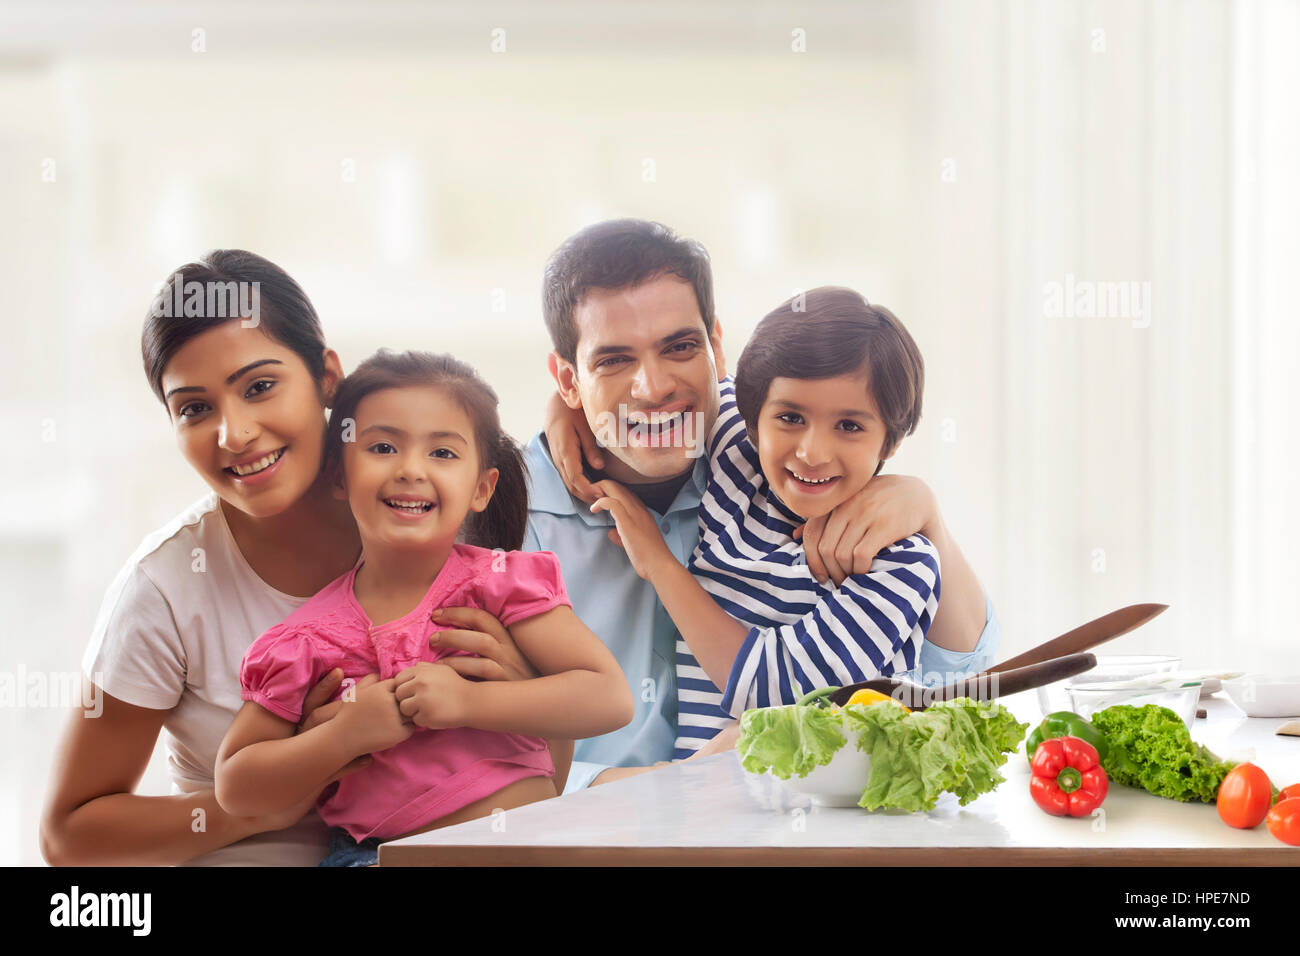 Happy family sitting together at kitchen table Stock Photo